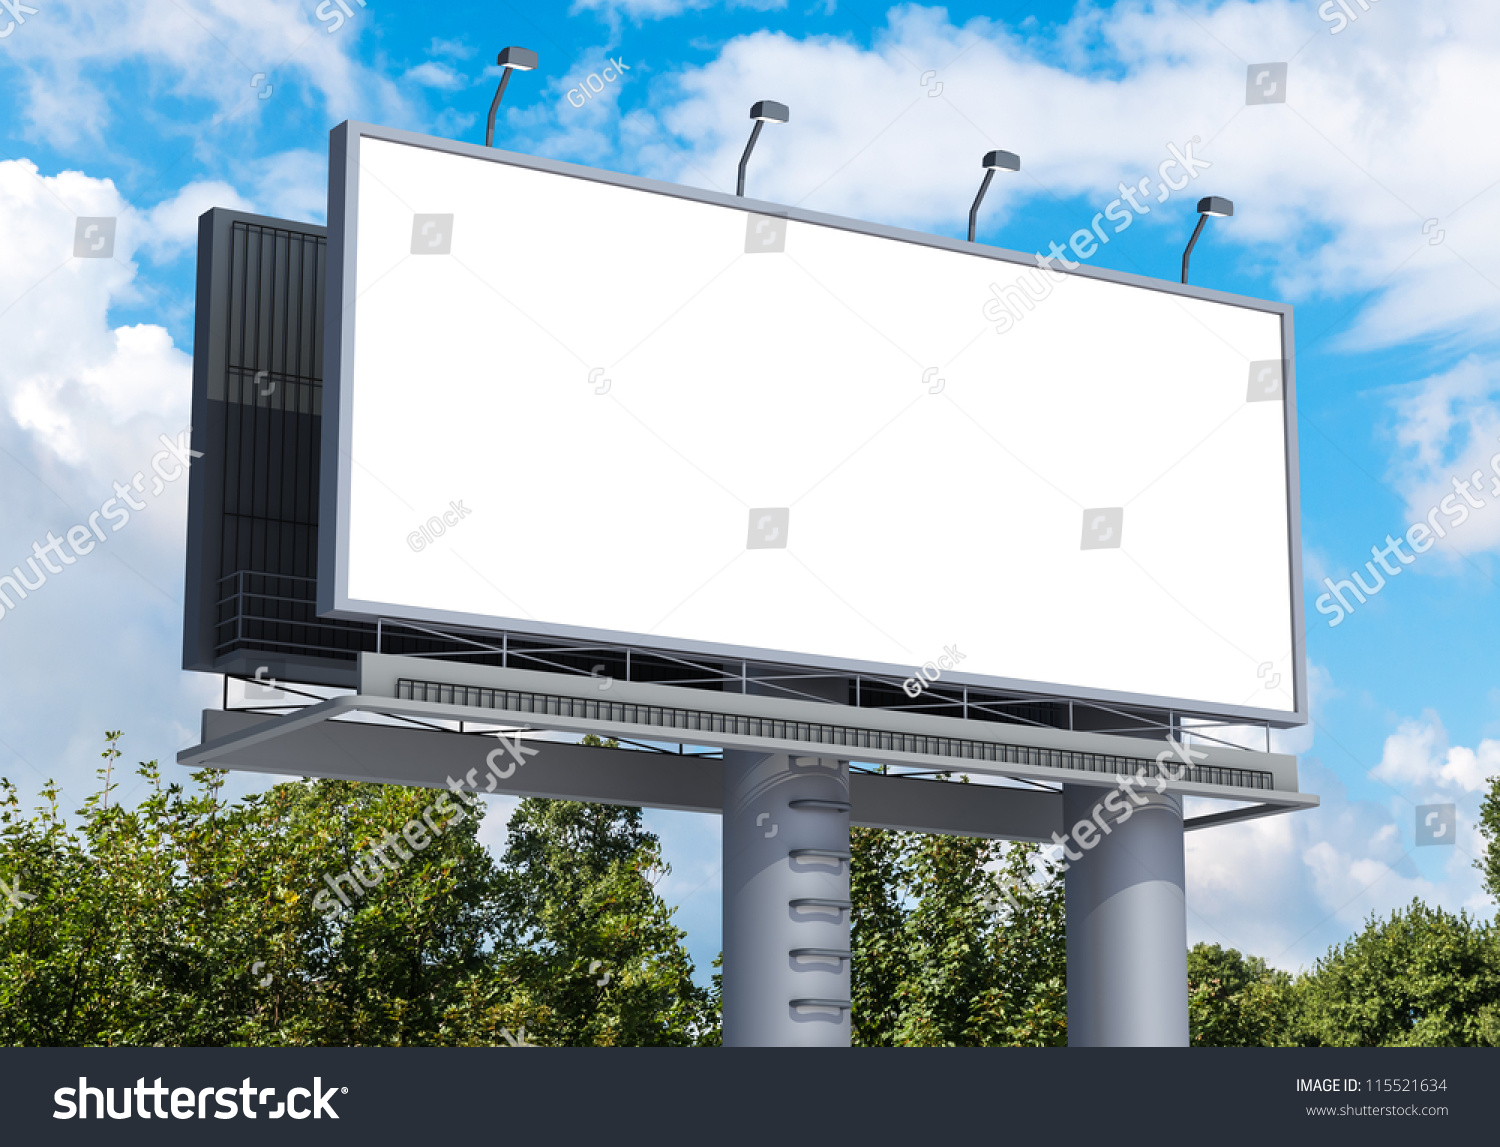 Billboard with empty screen, against blue cloudy sky #115521634